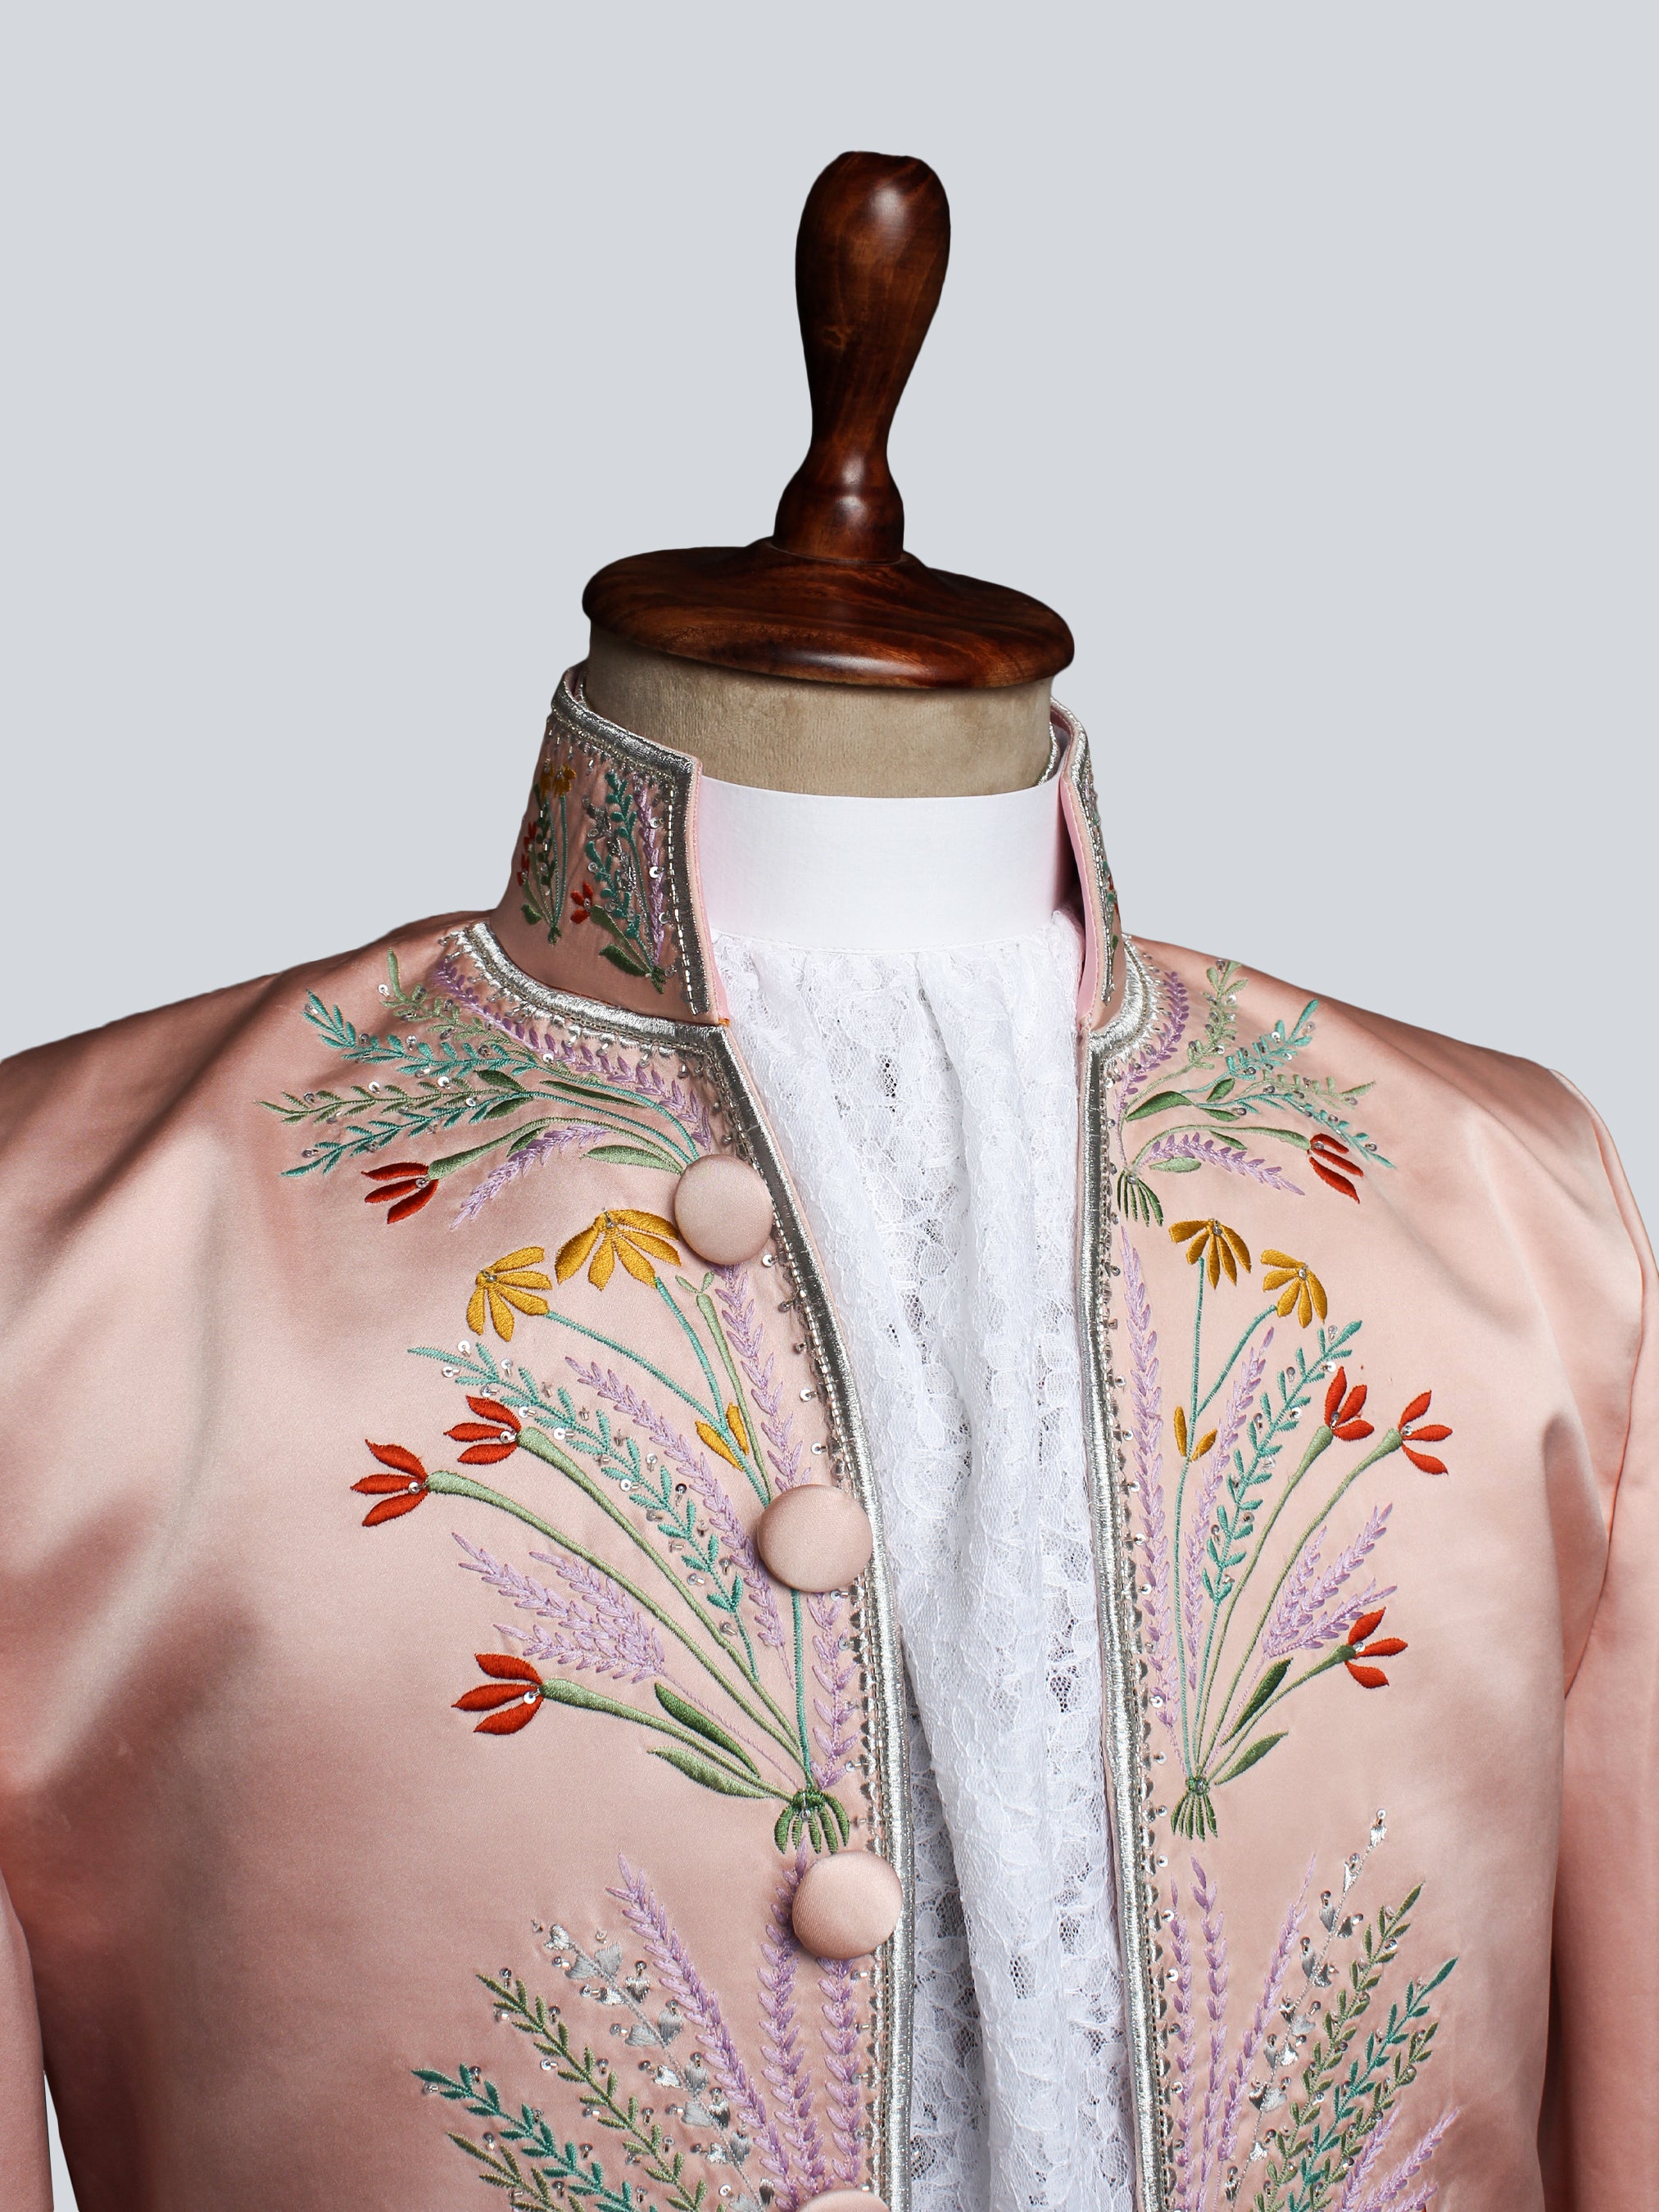 The Pink floral Rococo Suit